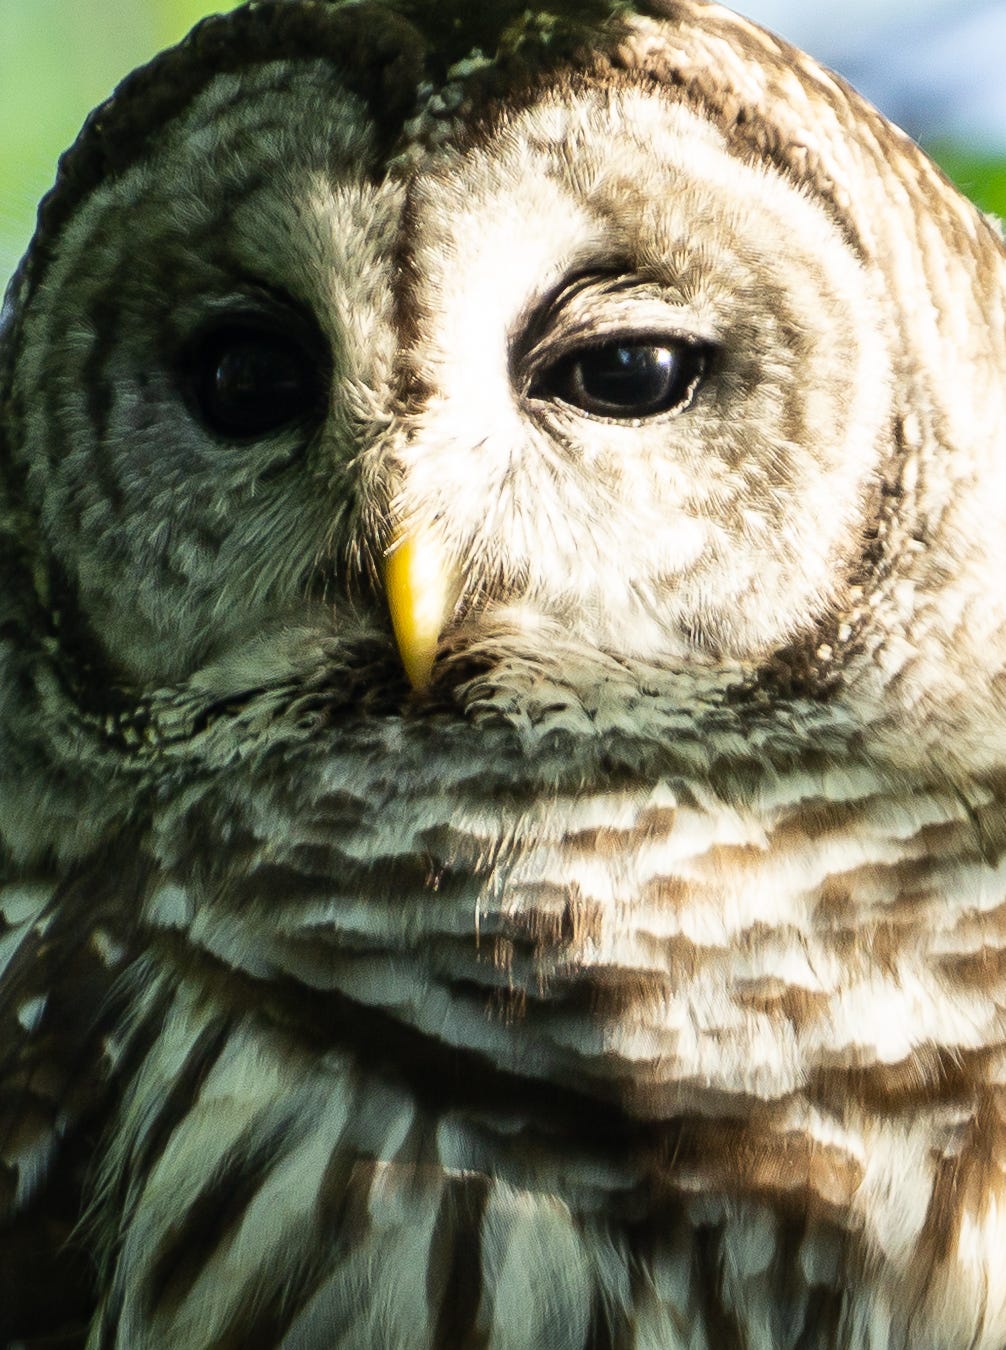 Extreme close-up of a barred owl.